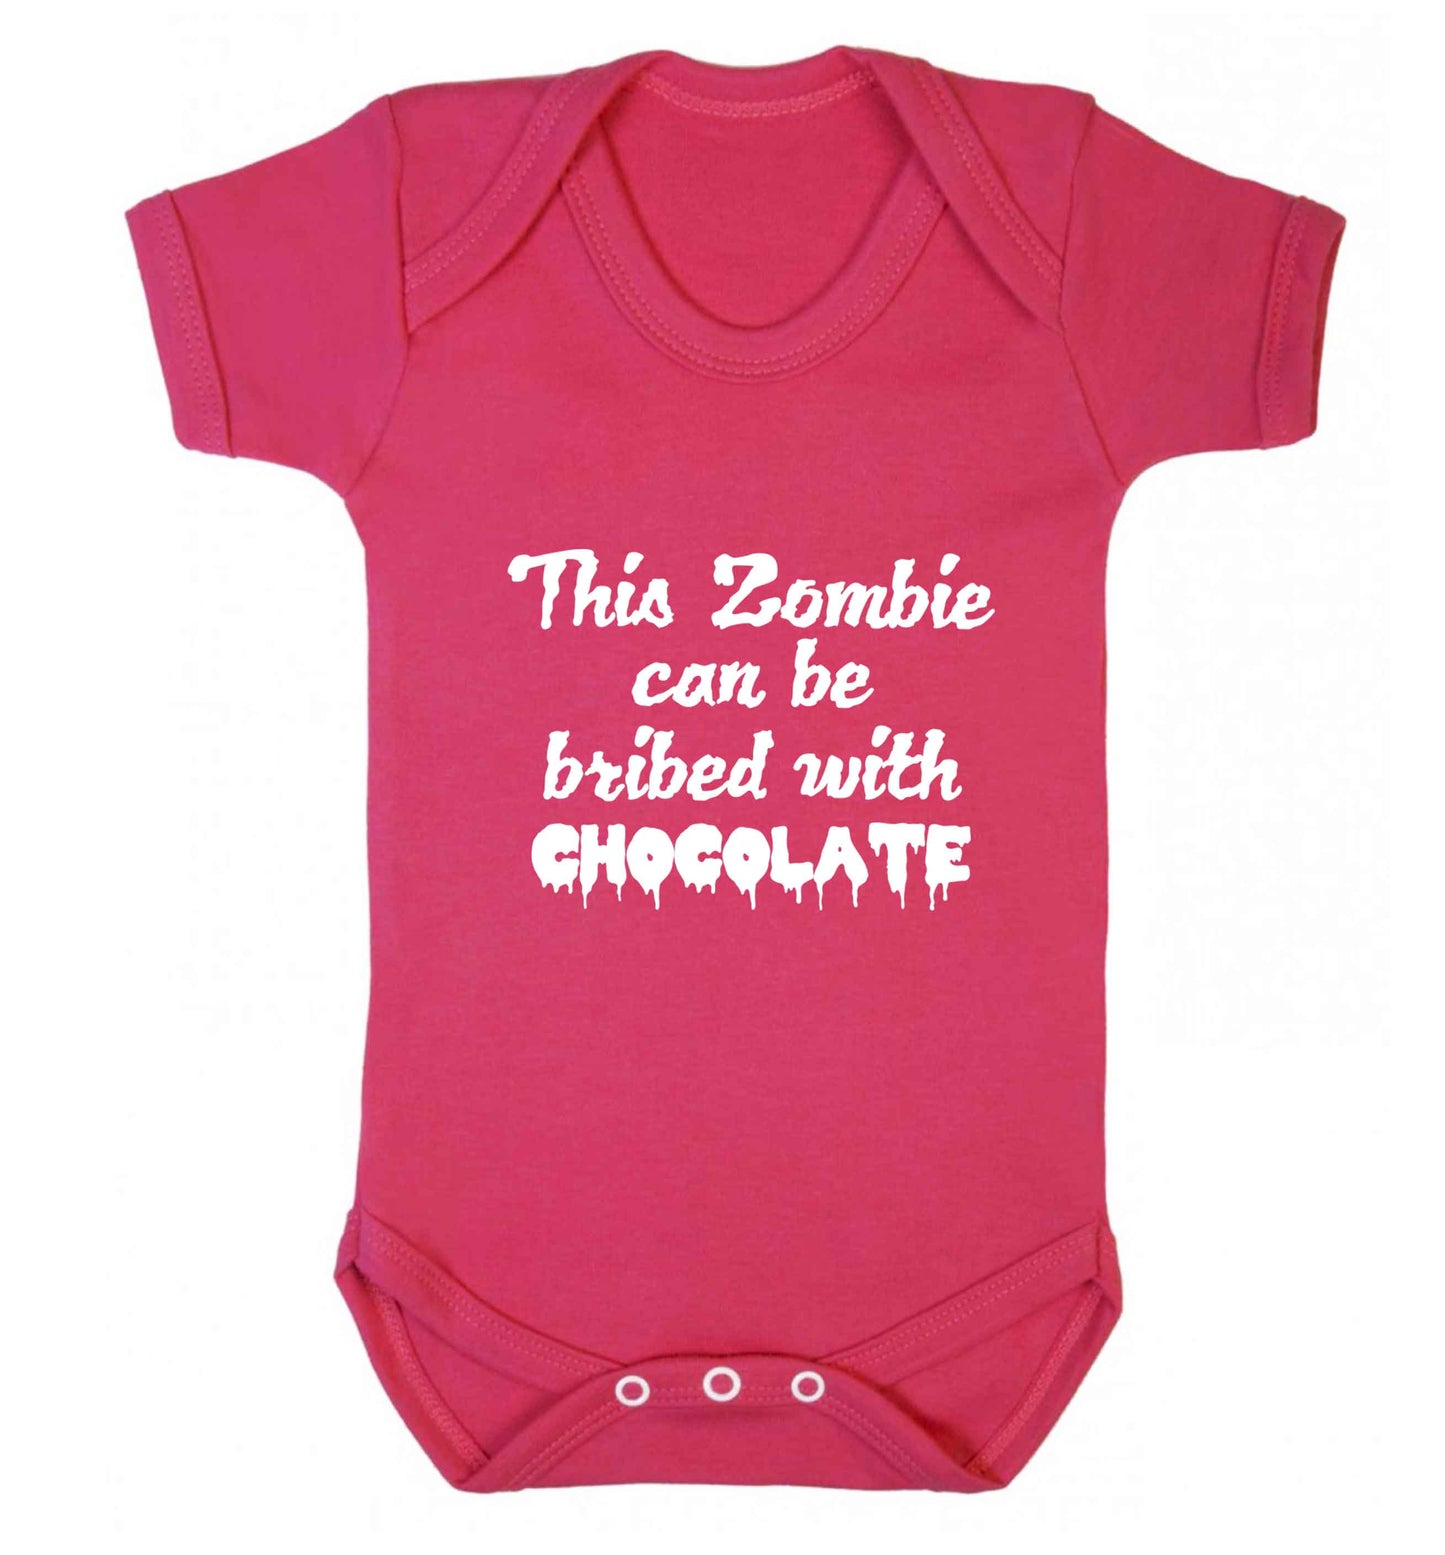 This zombie can be bribed with chocolate baby vest dark pink 18-24 months